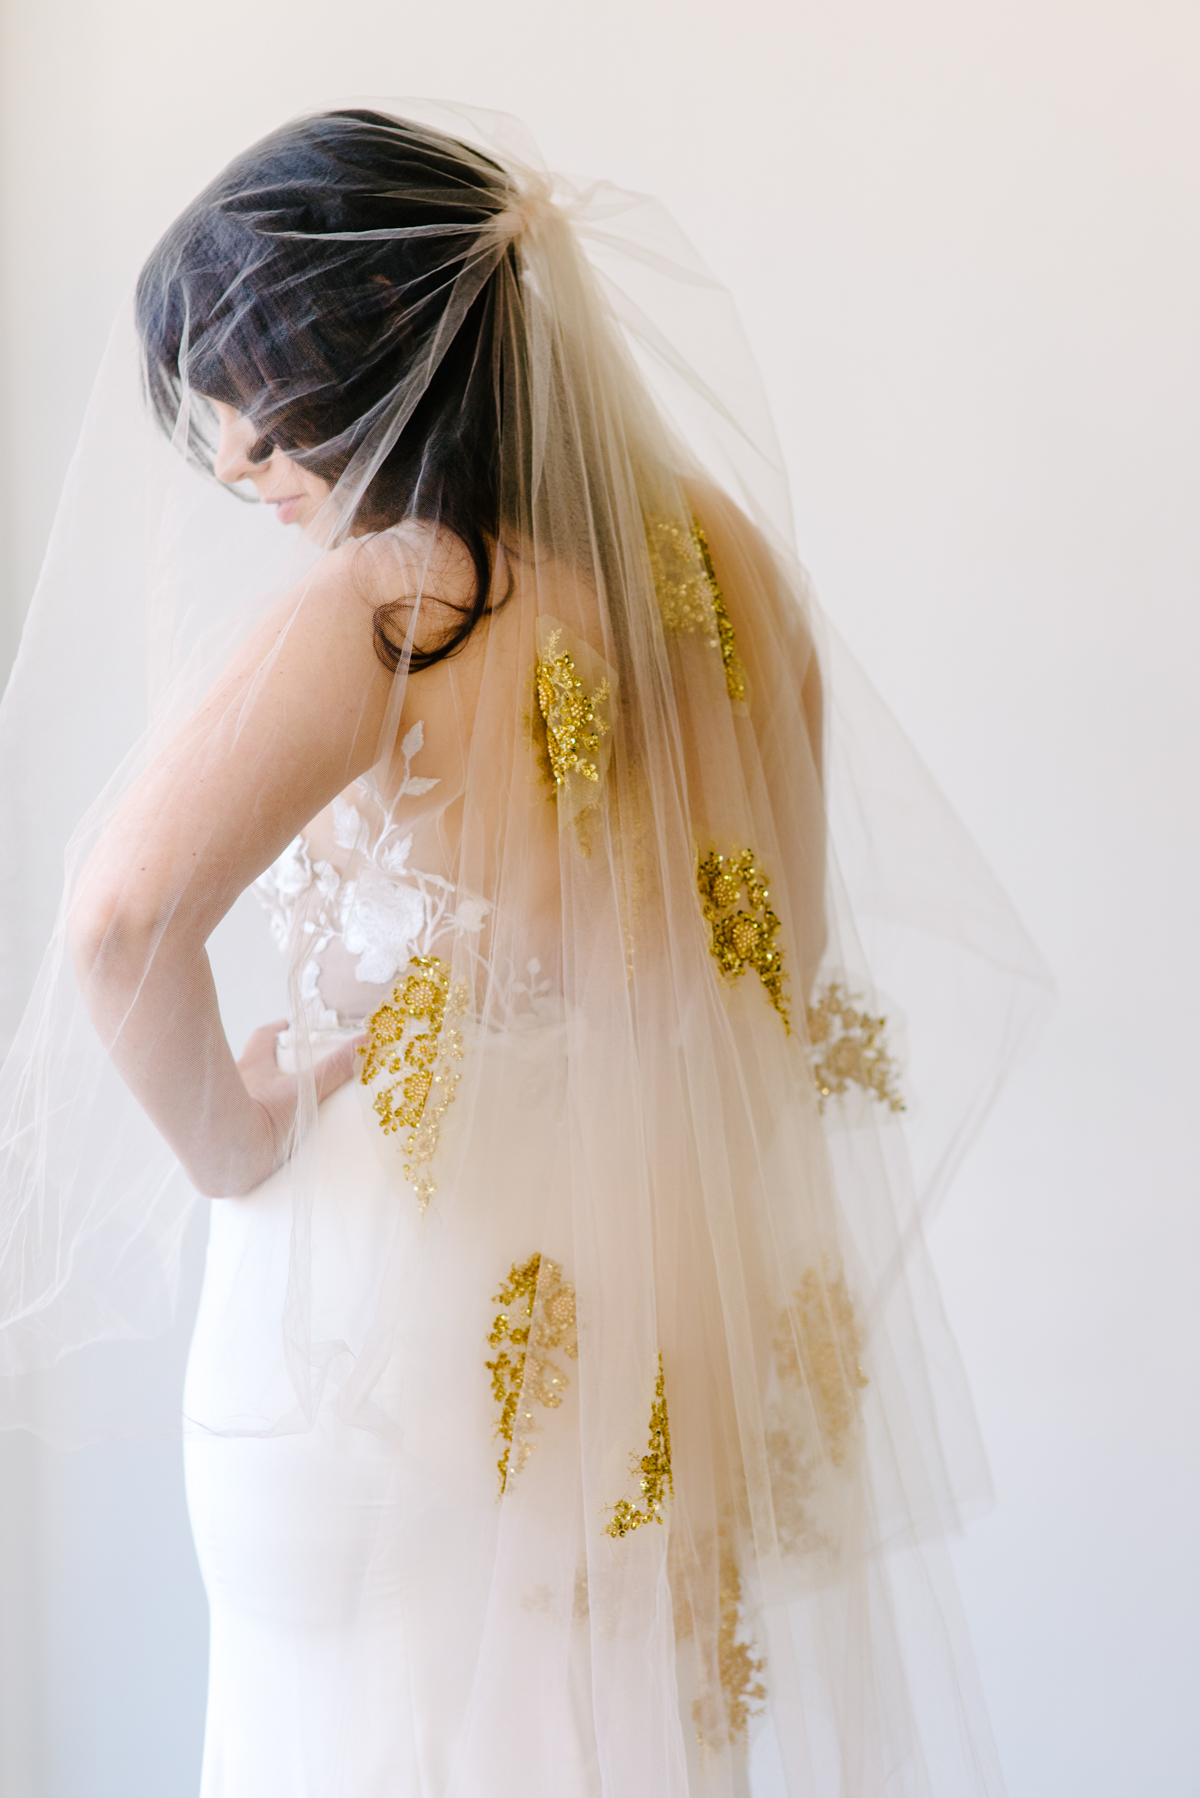 Reverse view of a wedding veil with gold appliqués attached